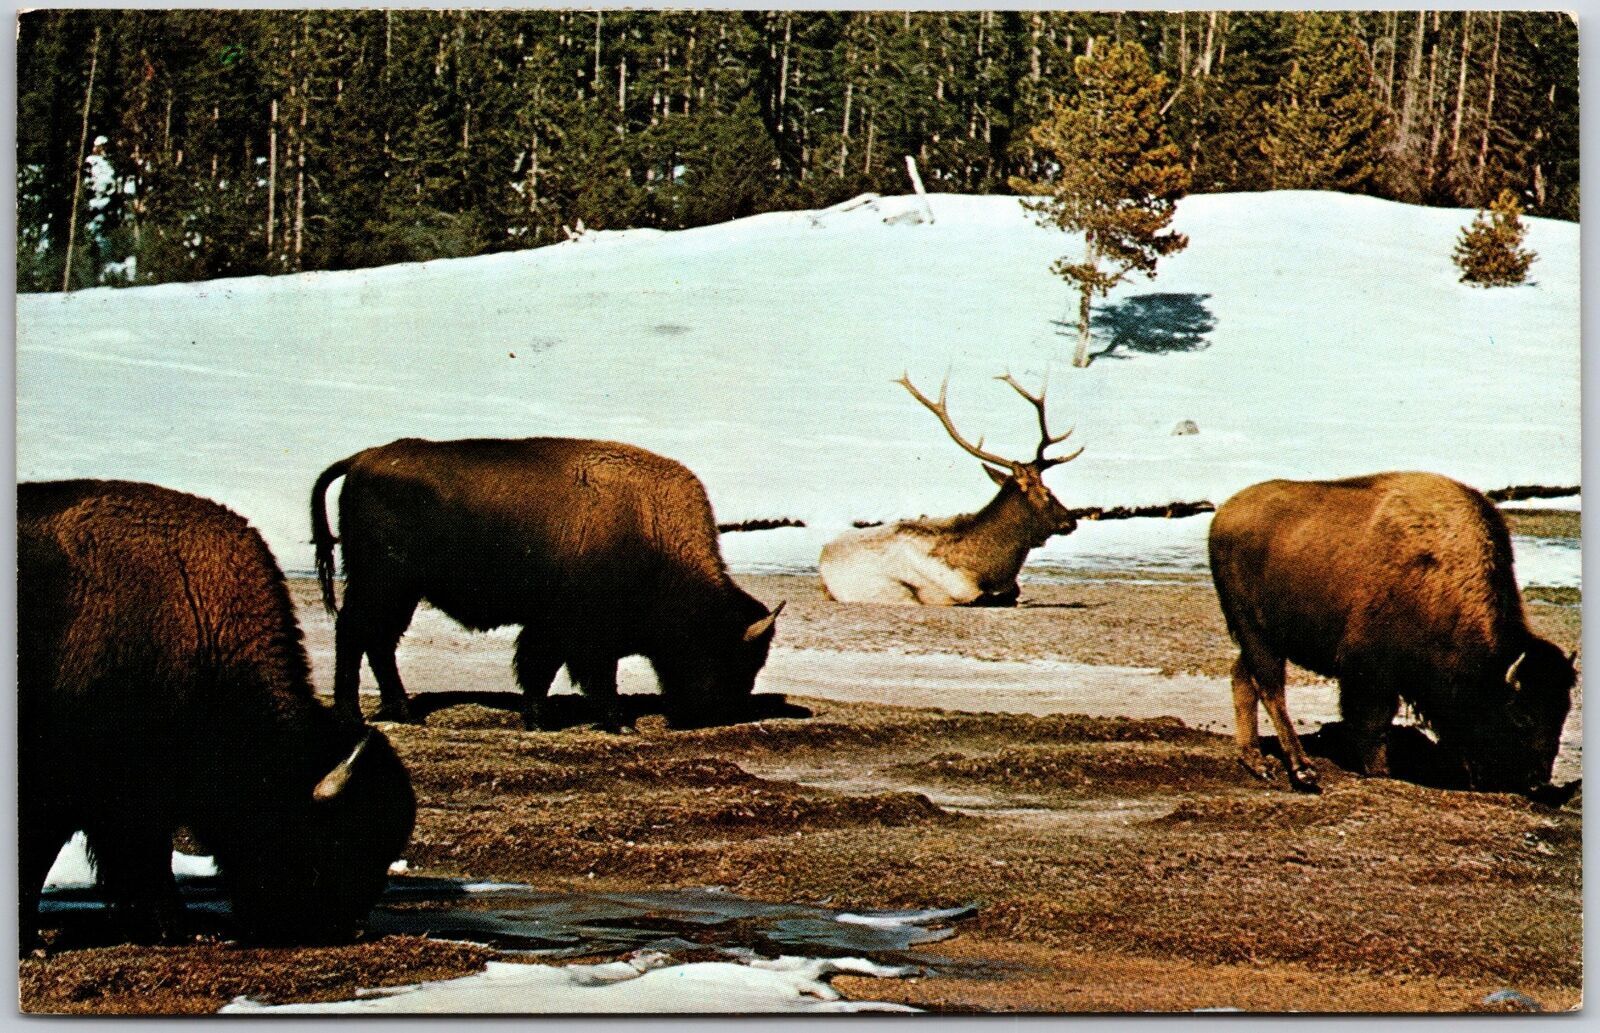 1961 Buffalo And Elk Grazing Together Yellowstone National Park Wyoming Postcard